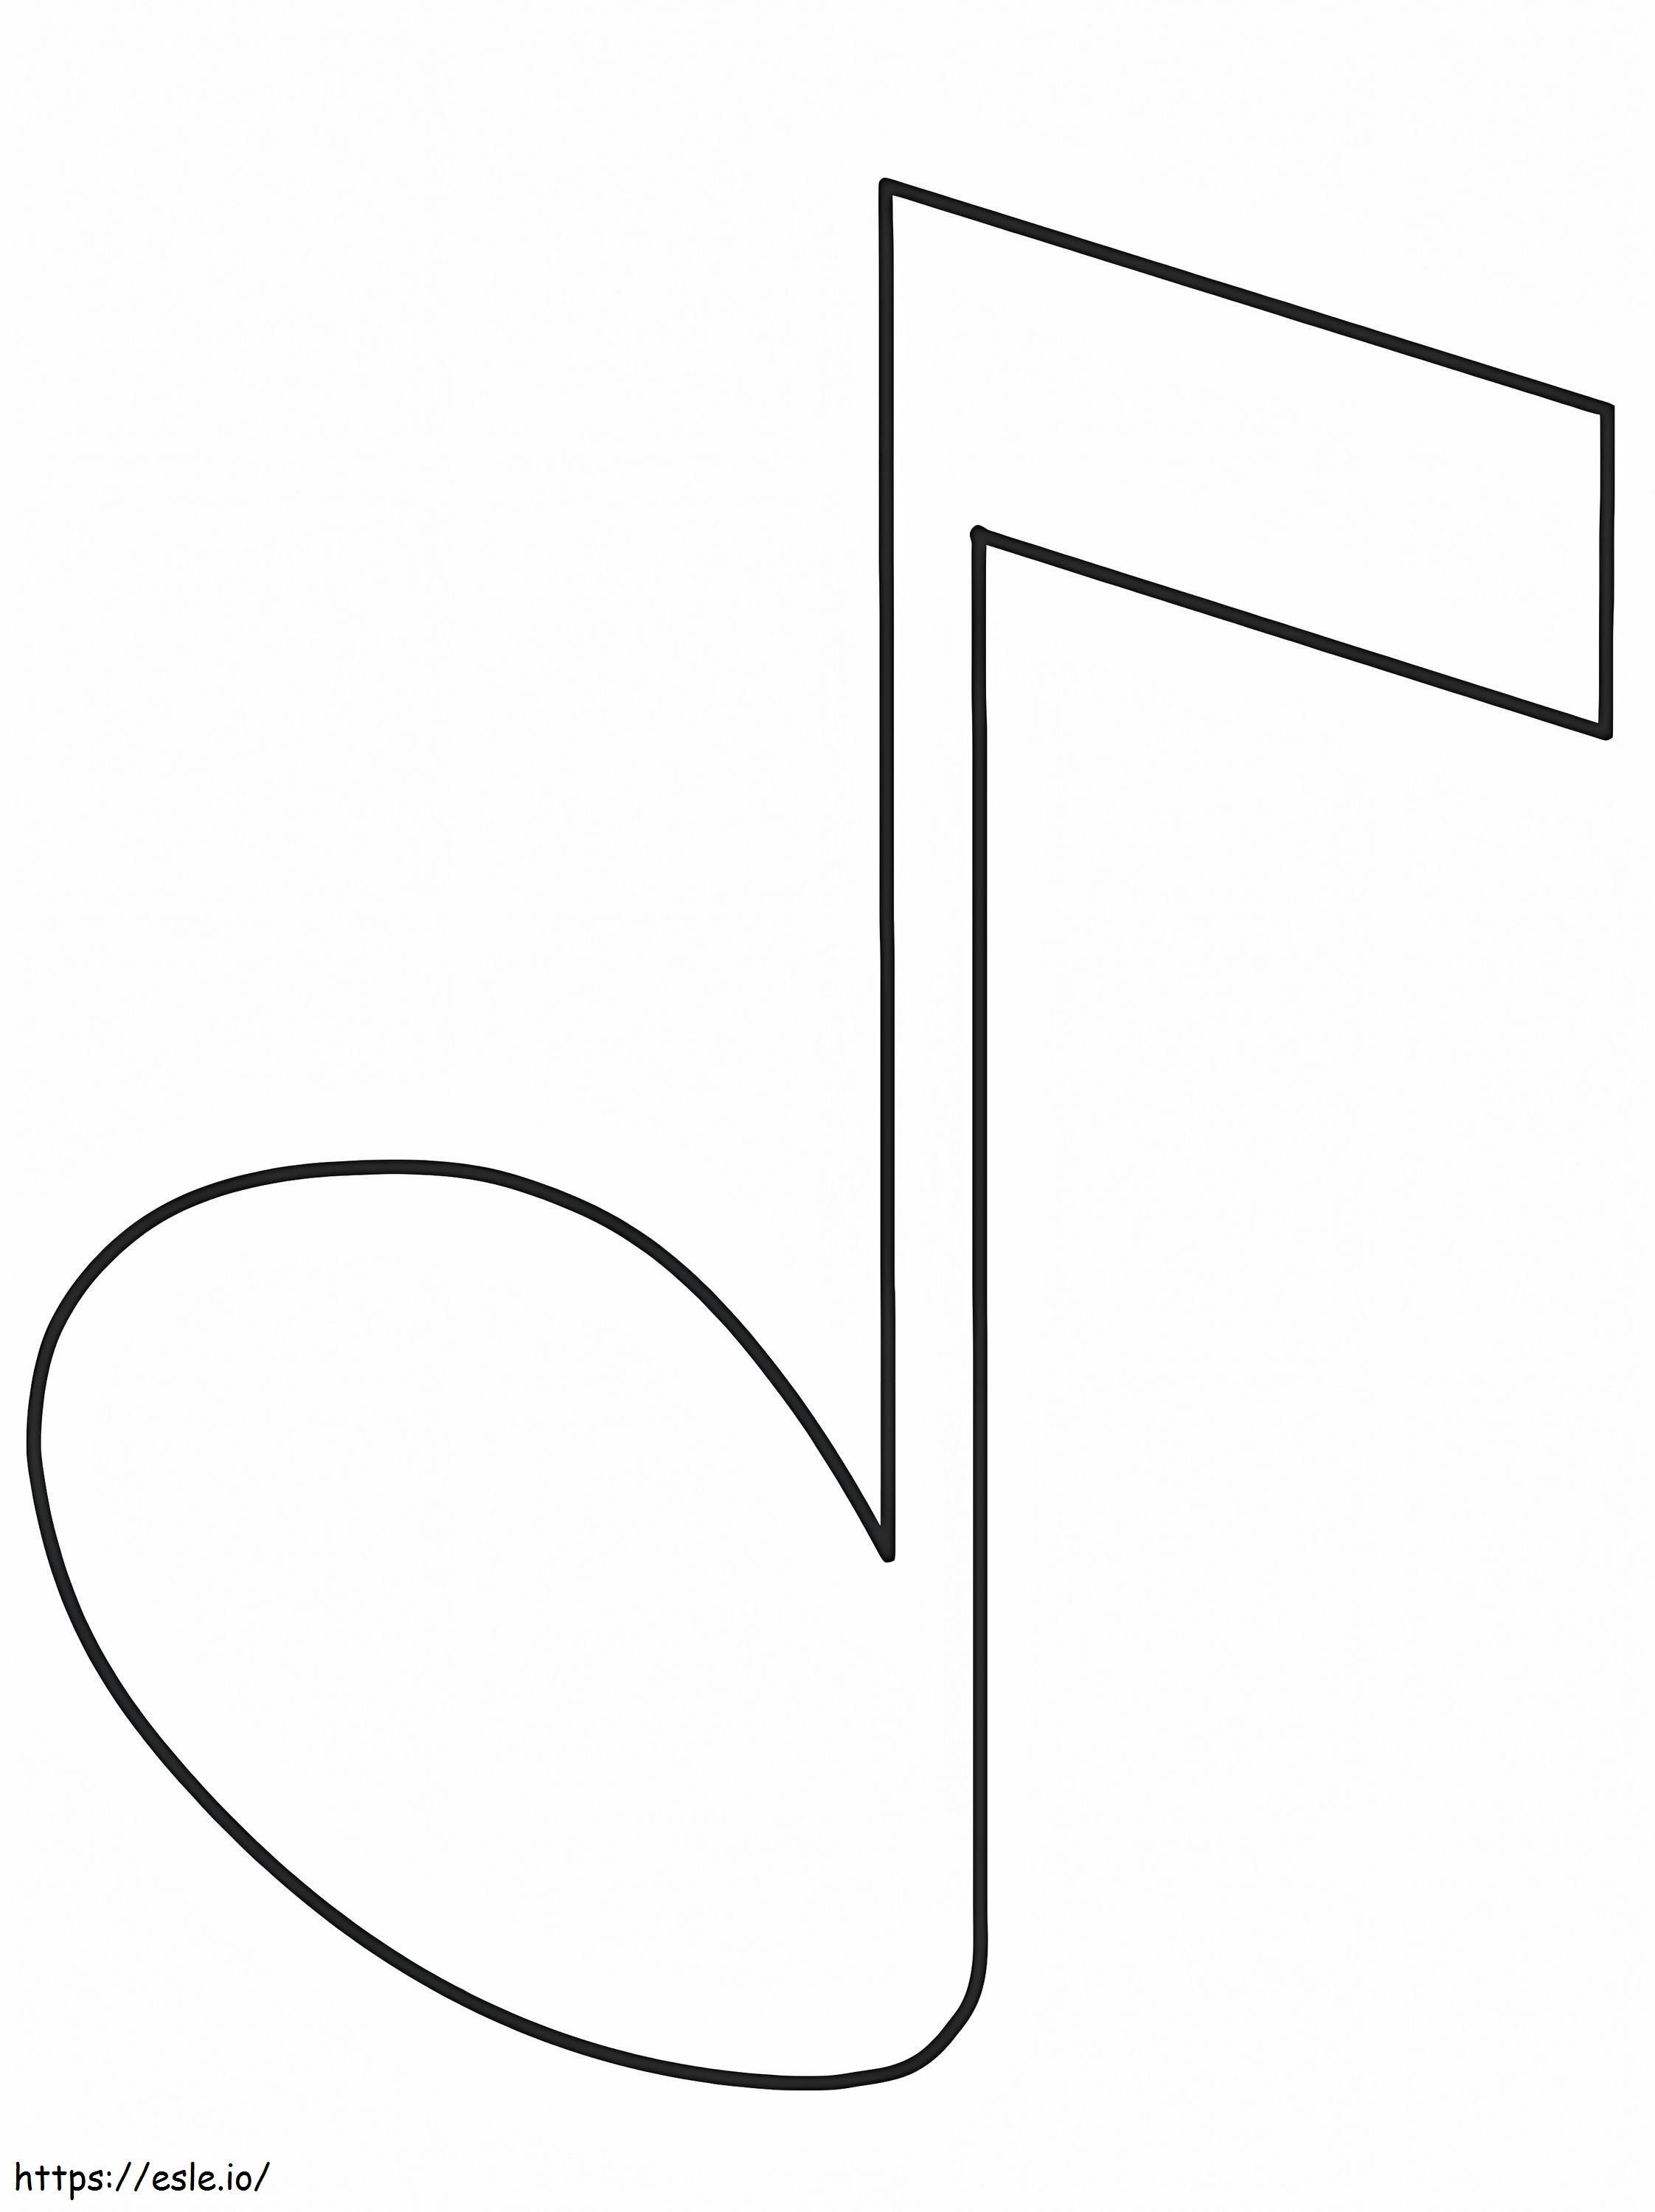 Simple Music Note 2 coloring page